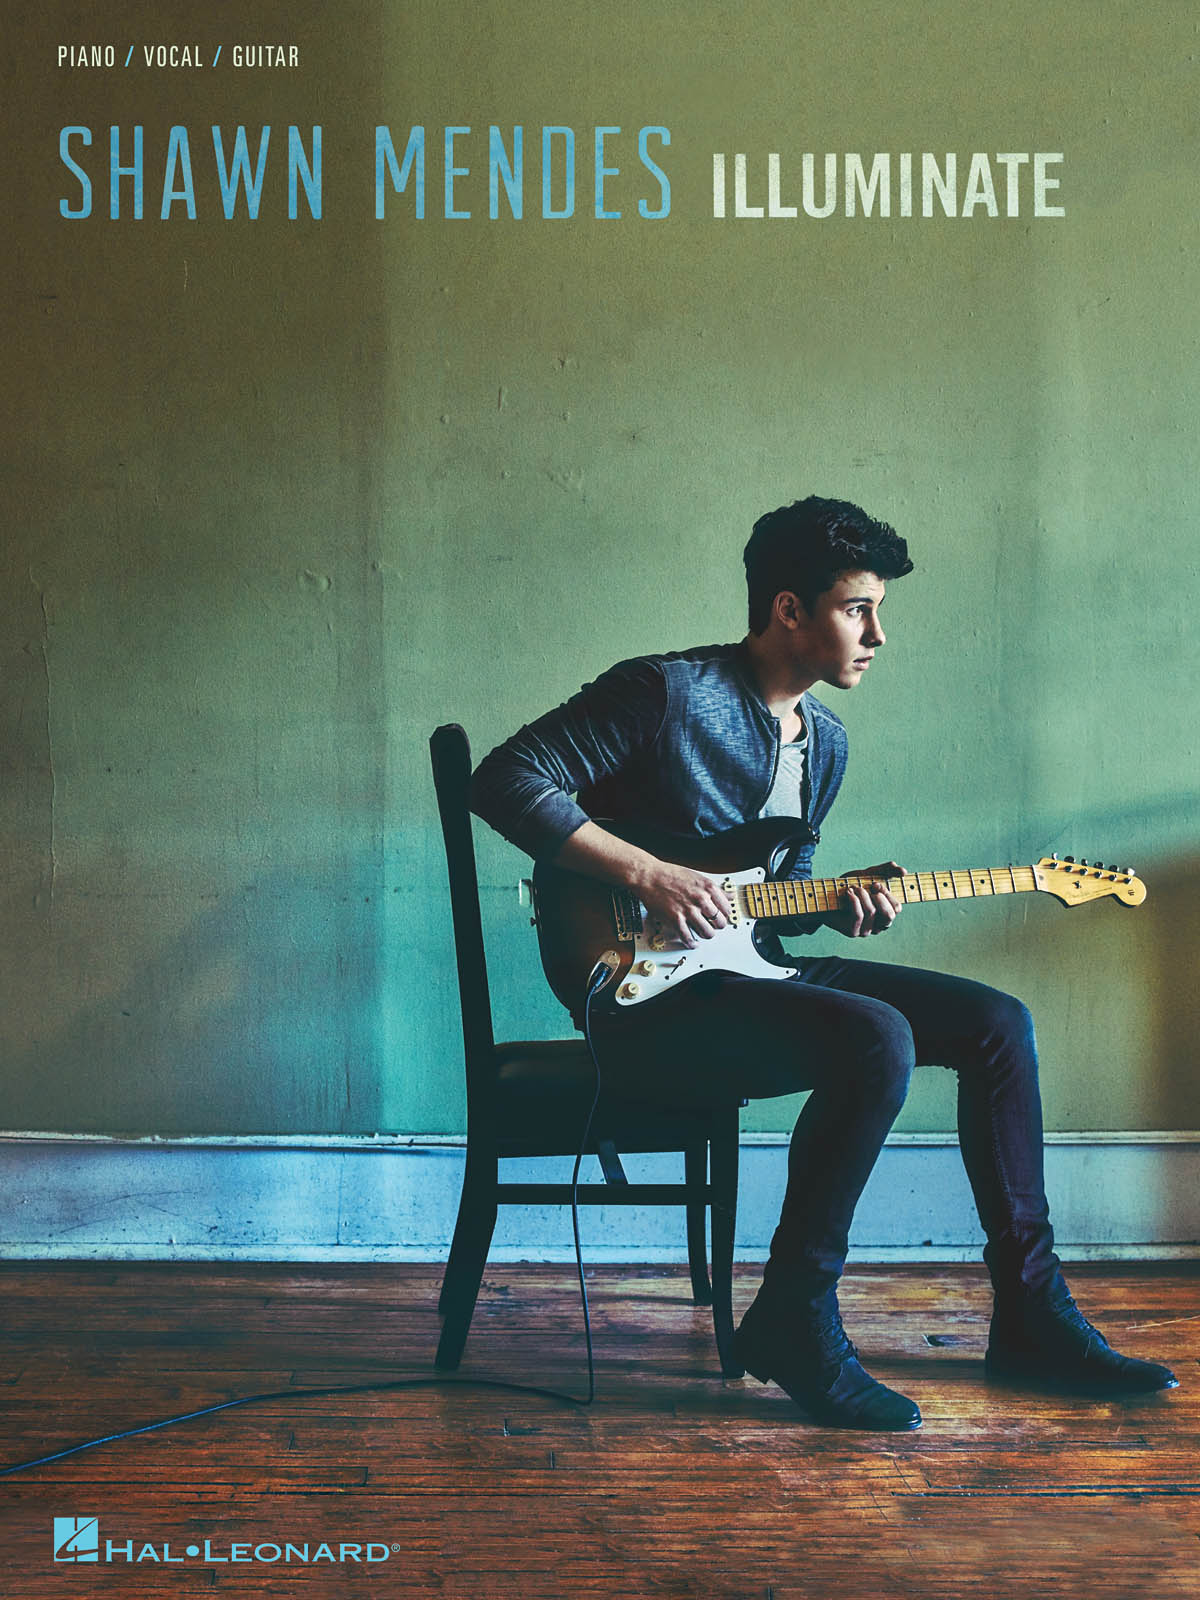 Shawn Mendes: Shawn Mendes - Illuminate: Piano  Vocal and Guitar: Album Songbook